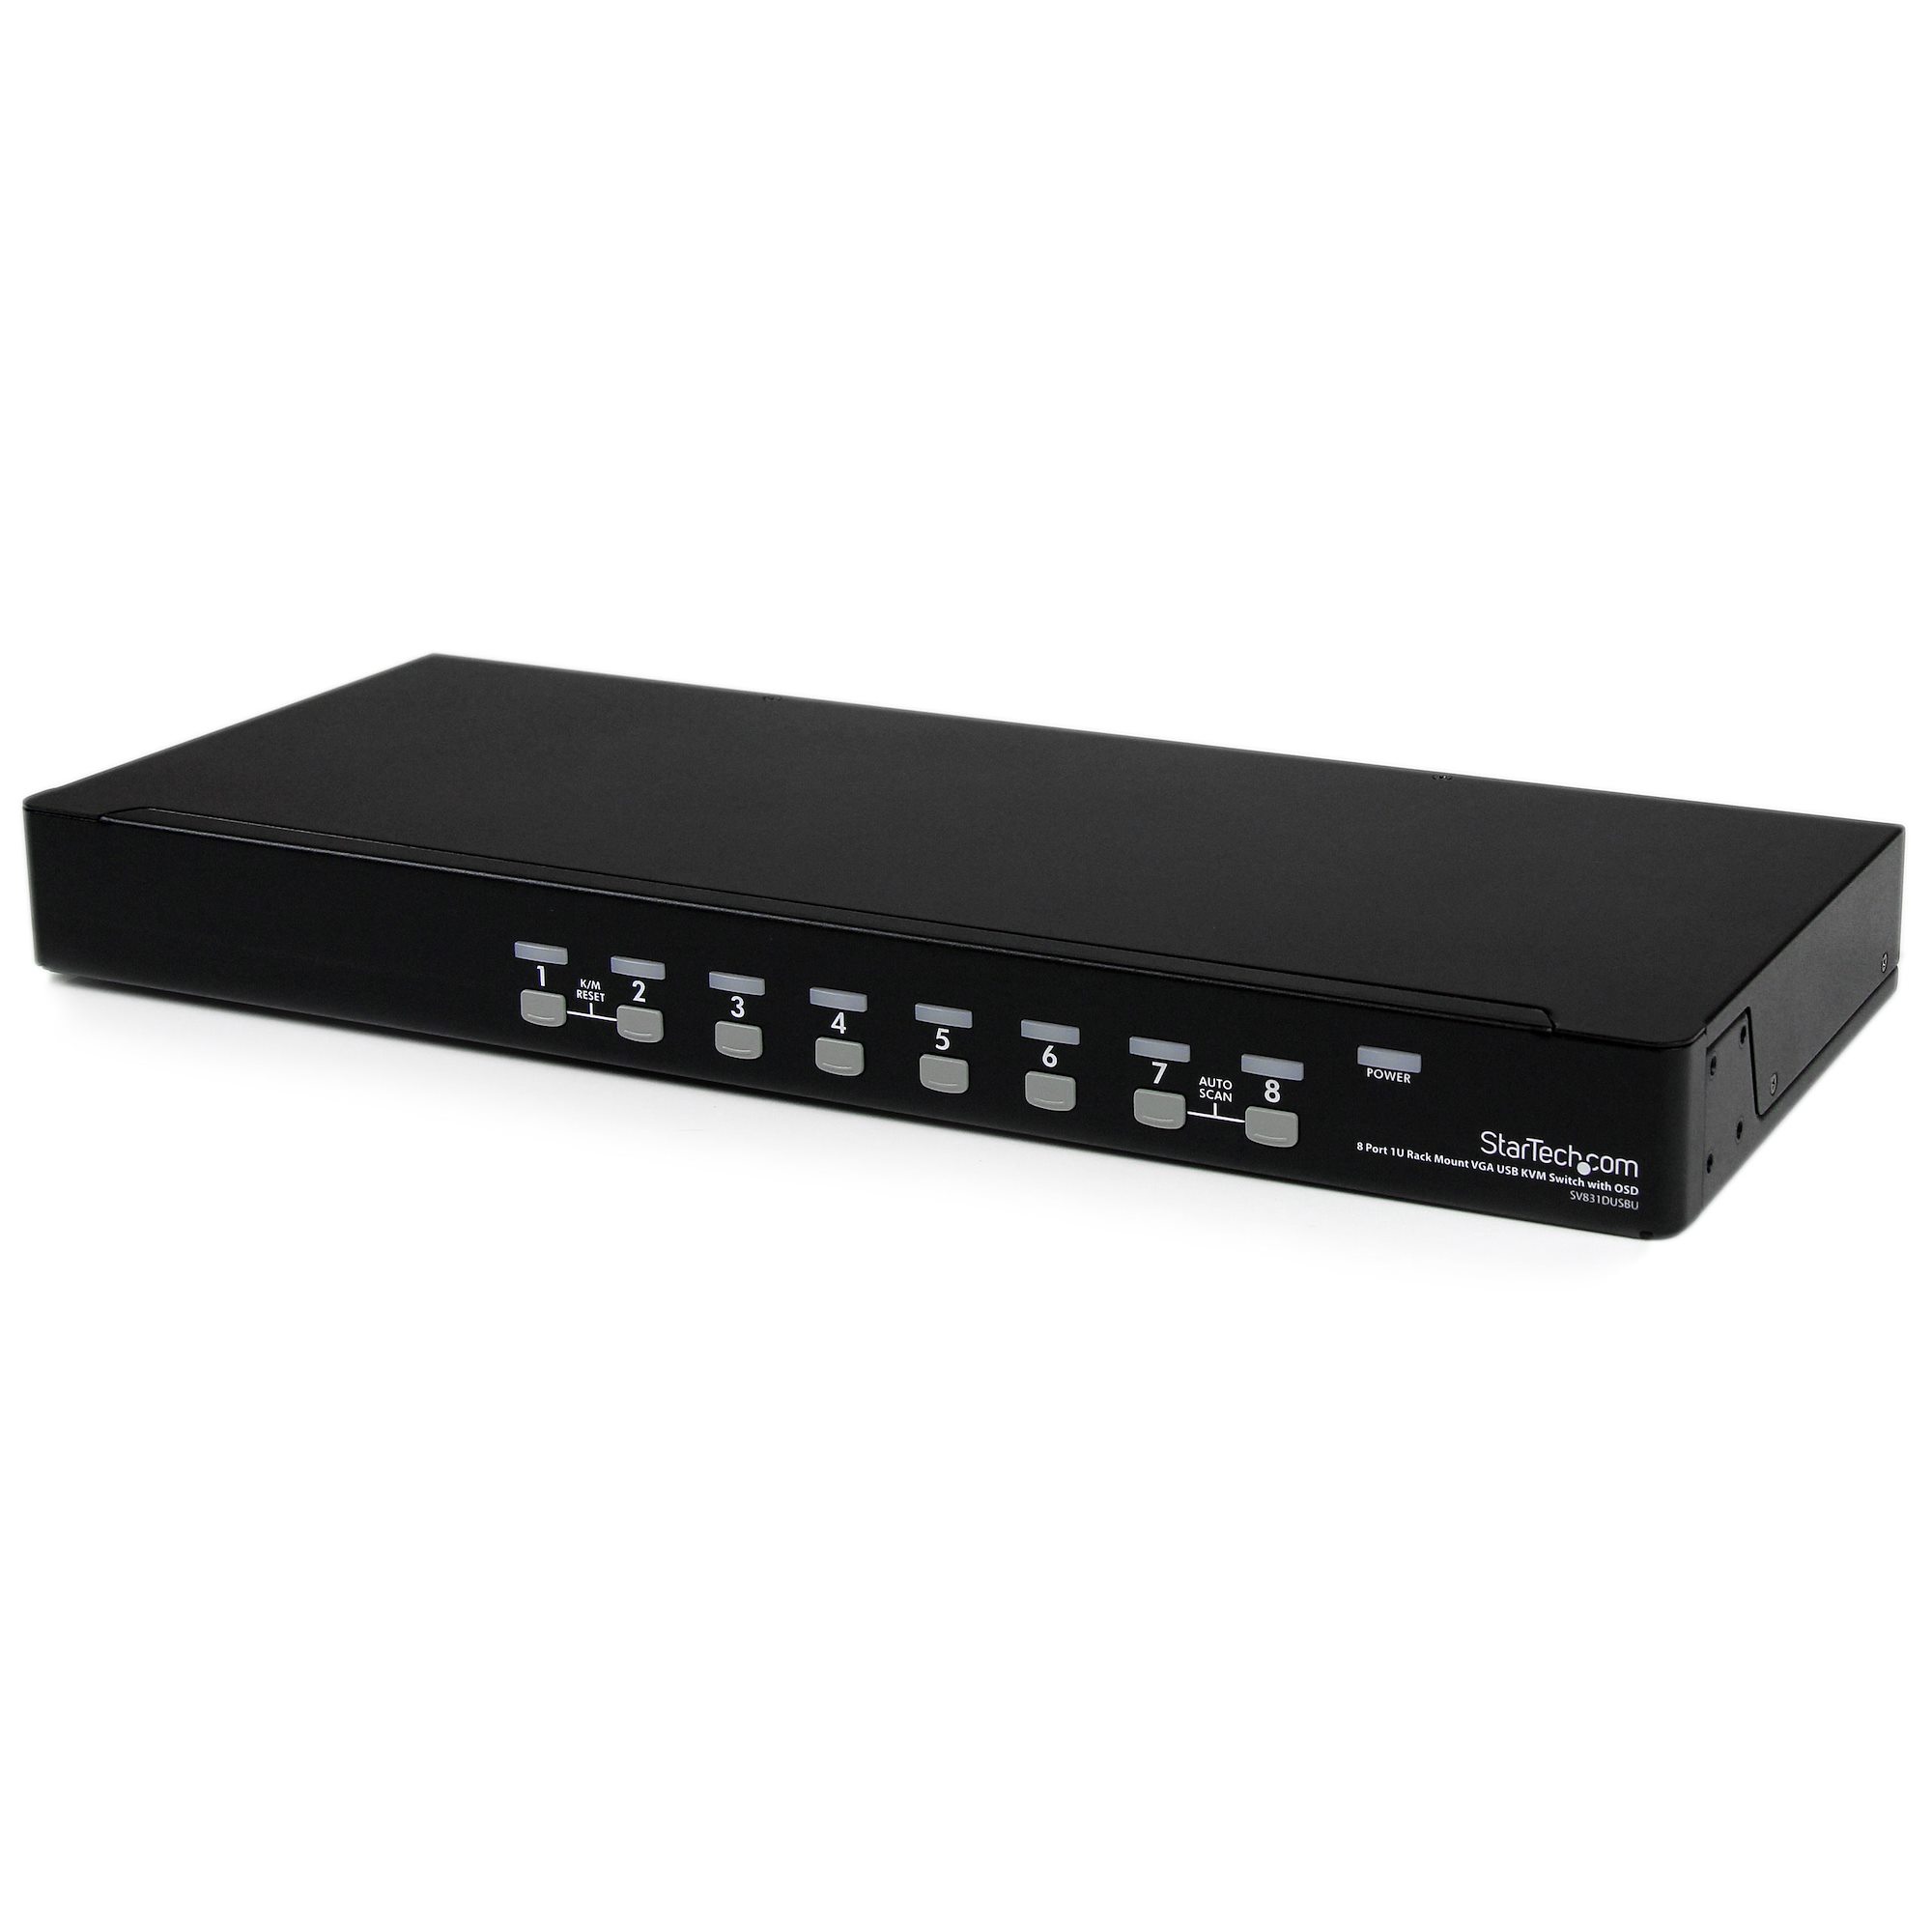 how to daisy chain routers?